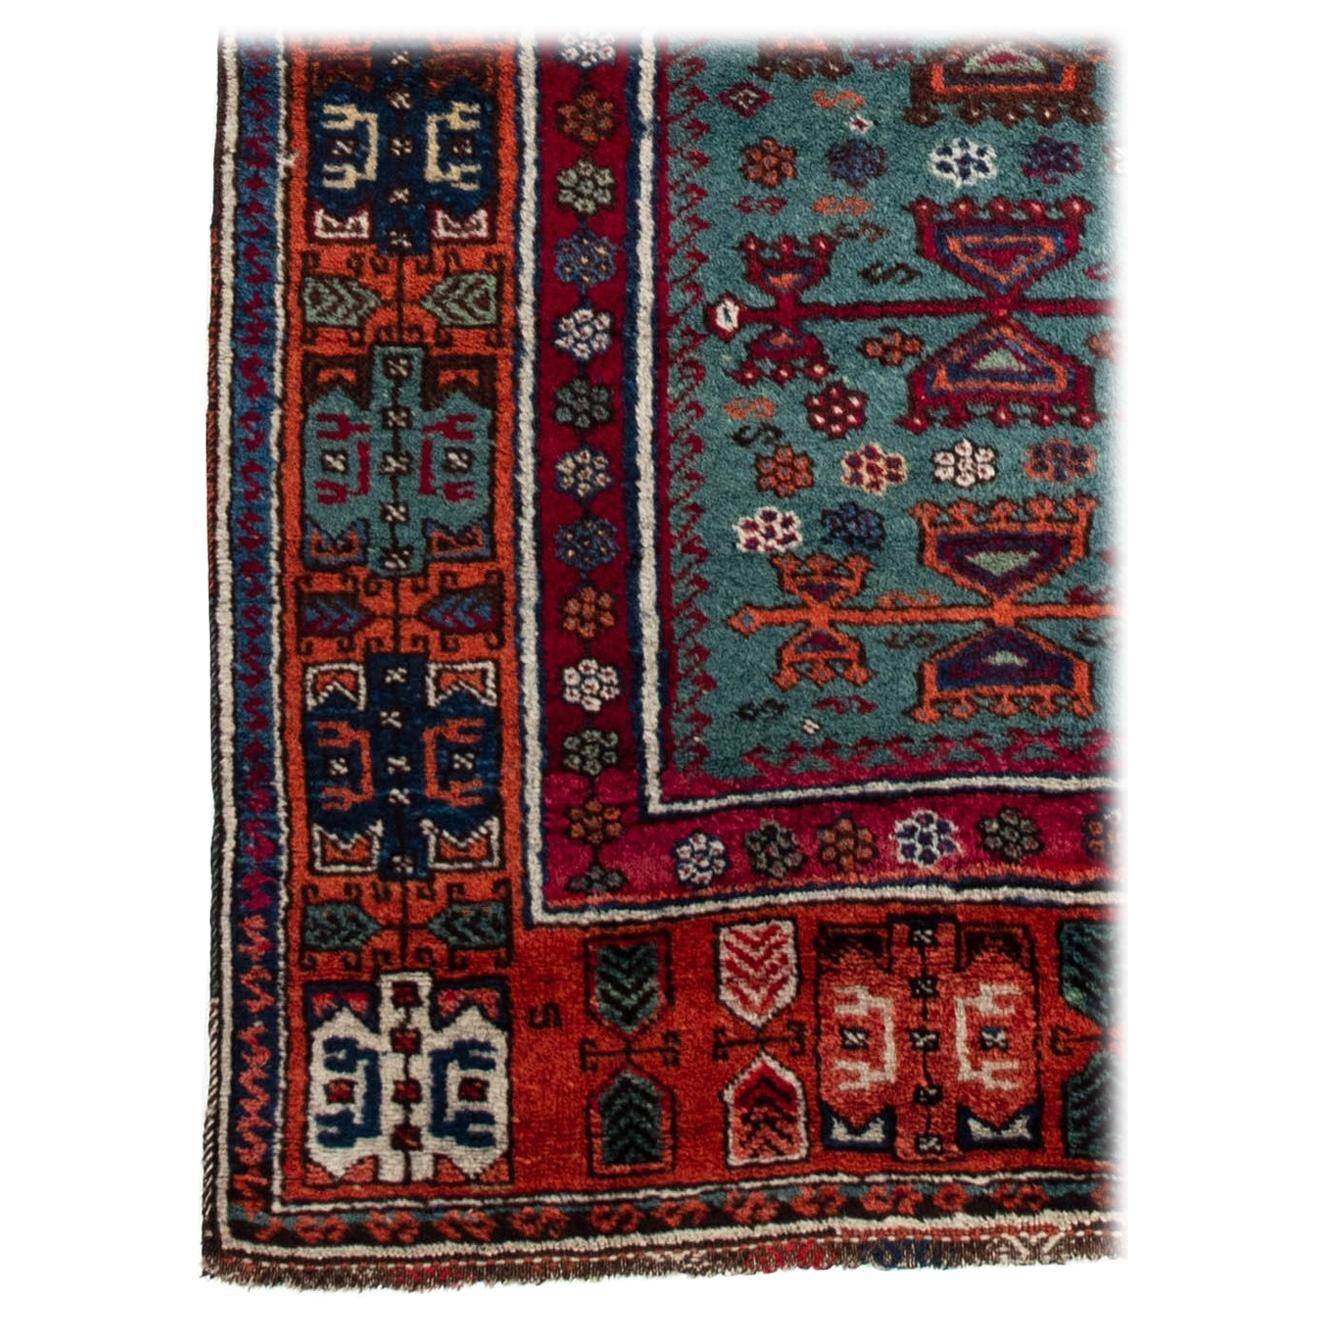 This antique tribal Yoruk prayer rug was woven in the late 19th century in South-eastern Anatolia, the center of the Ottoman Empire during that time. Yoruk carpets represent a long traditional of fine textile manufacturing from tribal groups moving